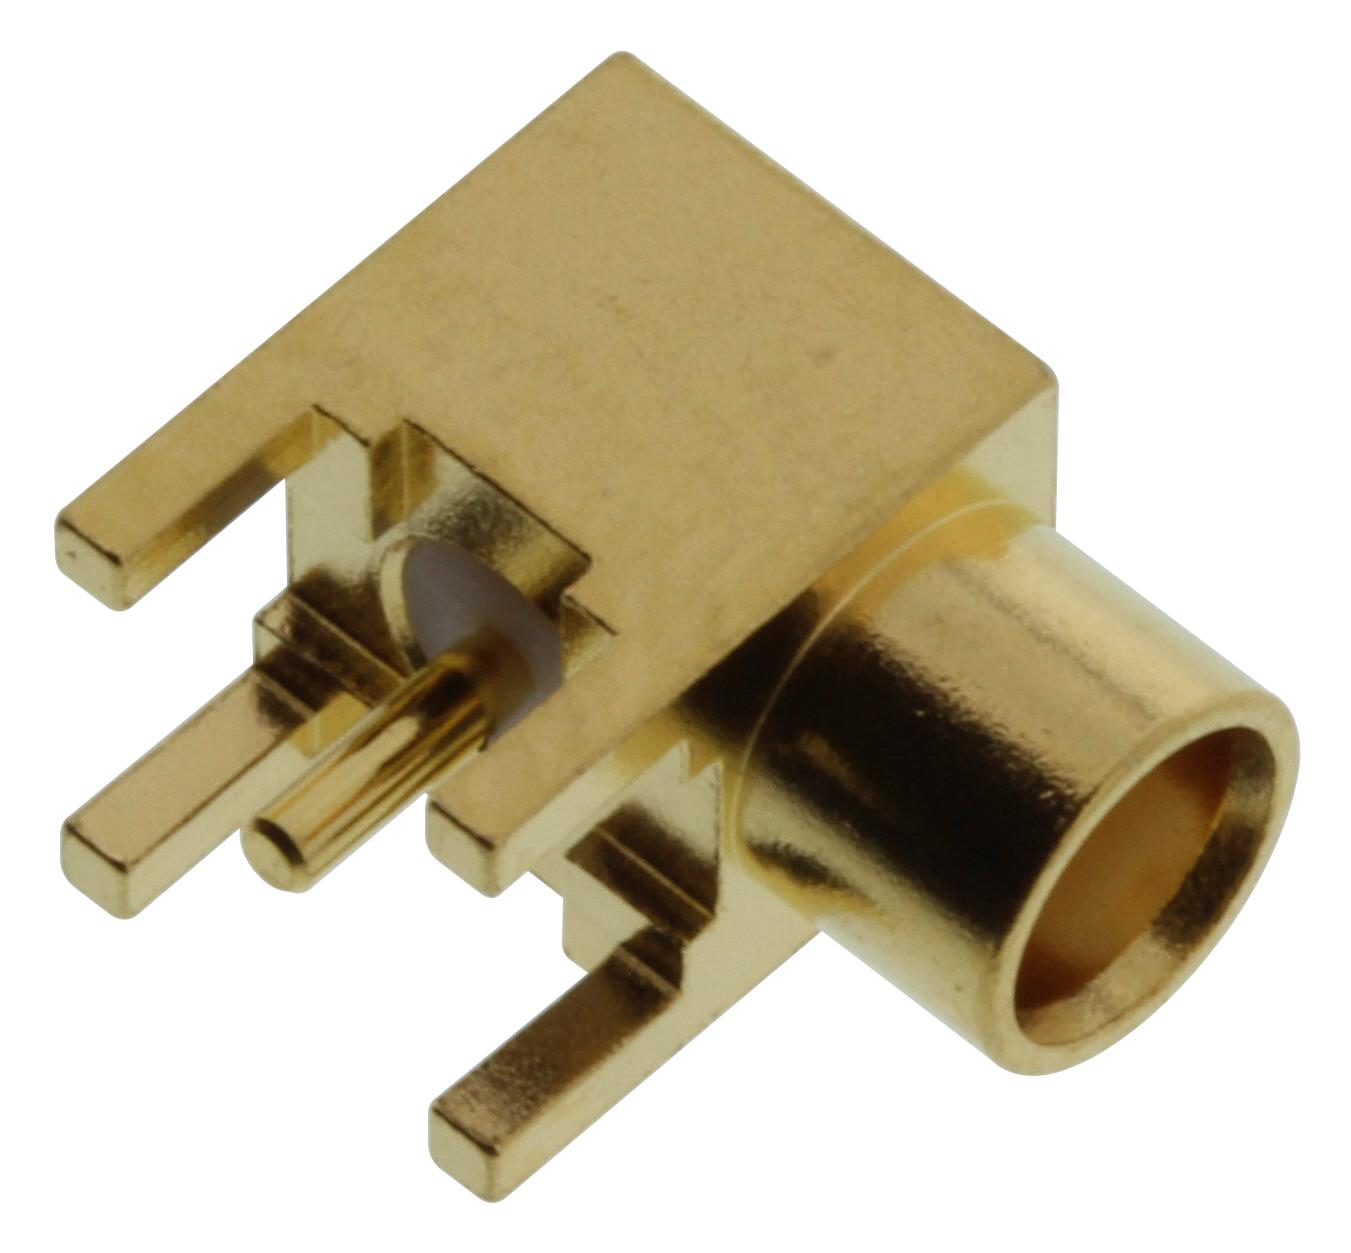 133-3701-311 RF COAXIAL, MCX, RIGHT ANGLE JACK, 50OHM JOHNSON - CINCH CONNECTIVITY